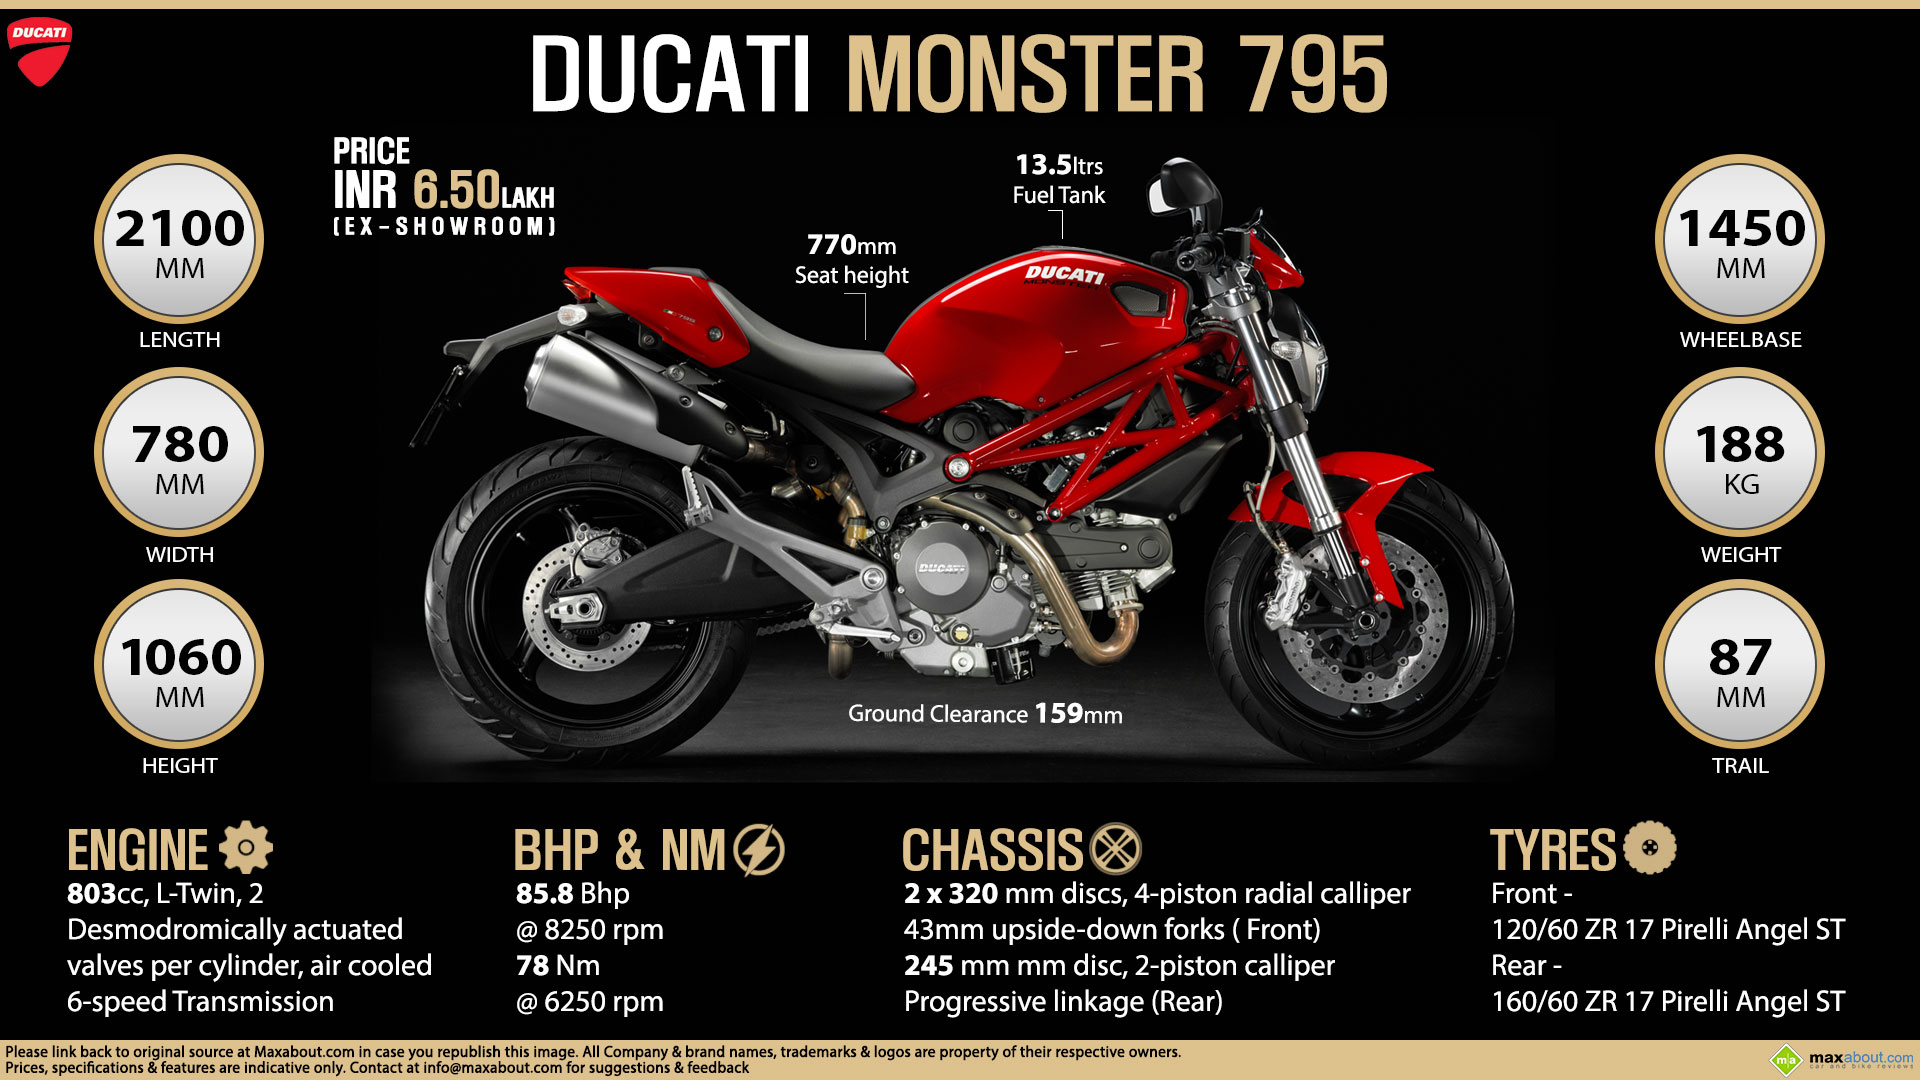 Quick Facts - Ducati Monster 795